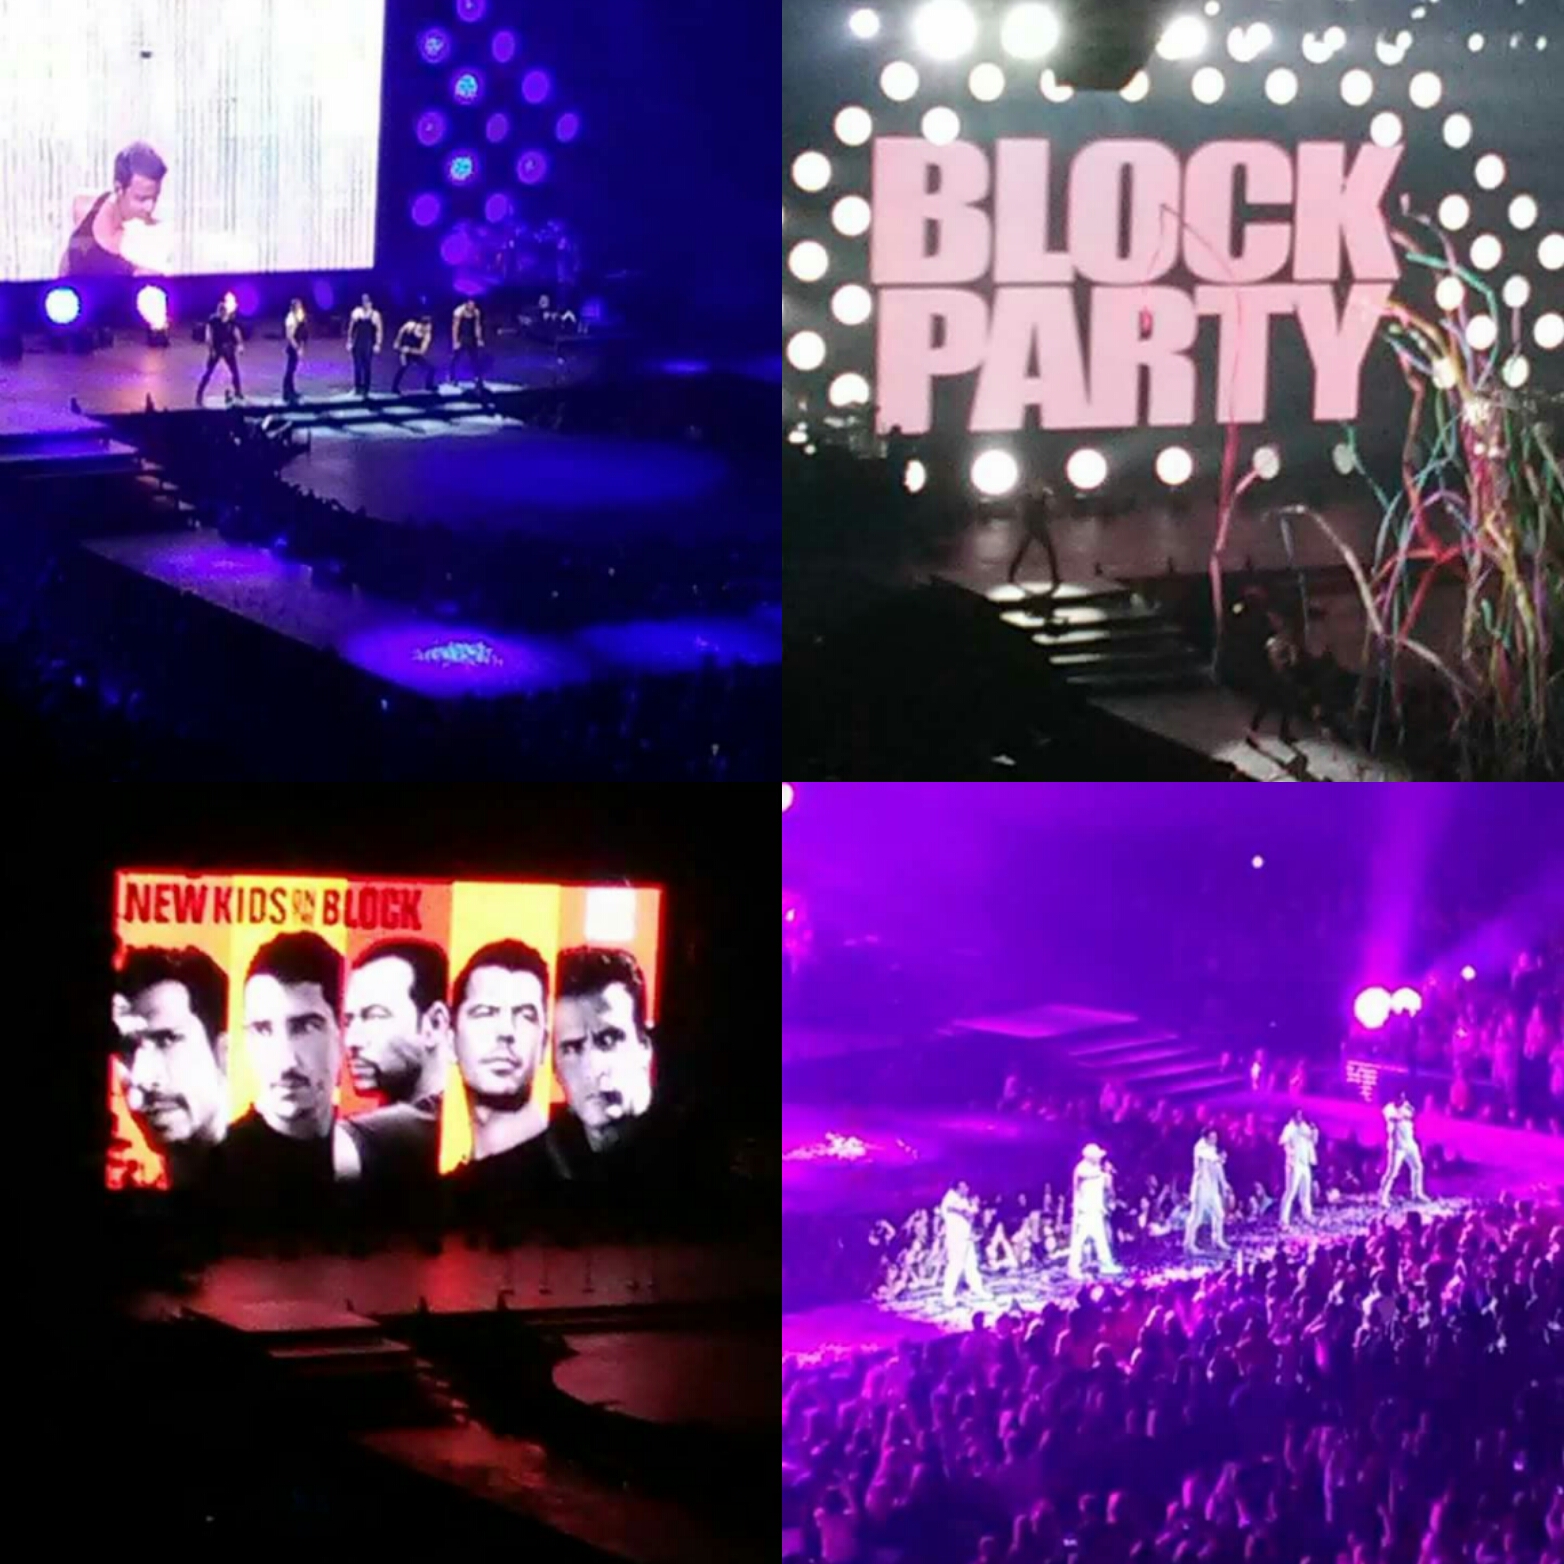 Photo Credit: I snapped these photos at the NKOTB show I attended in DC (in 2017). 